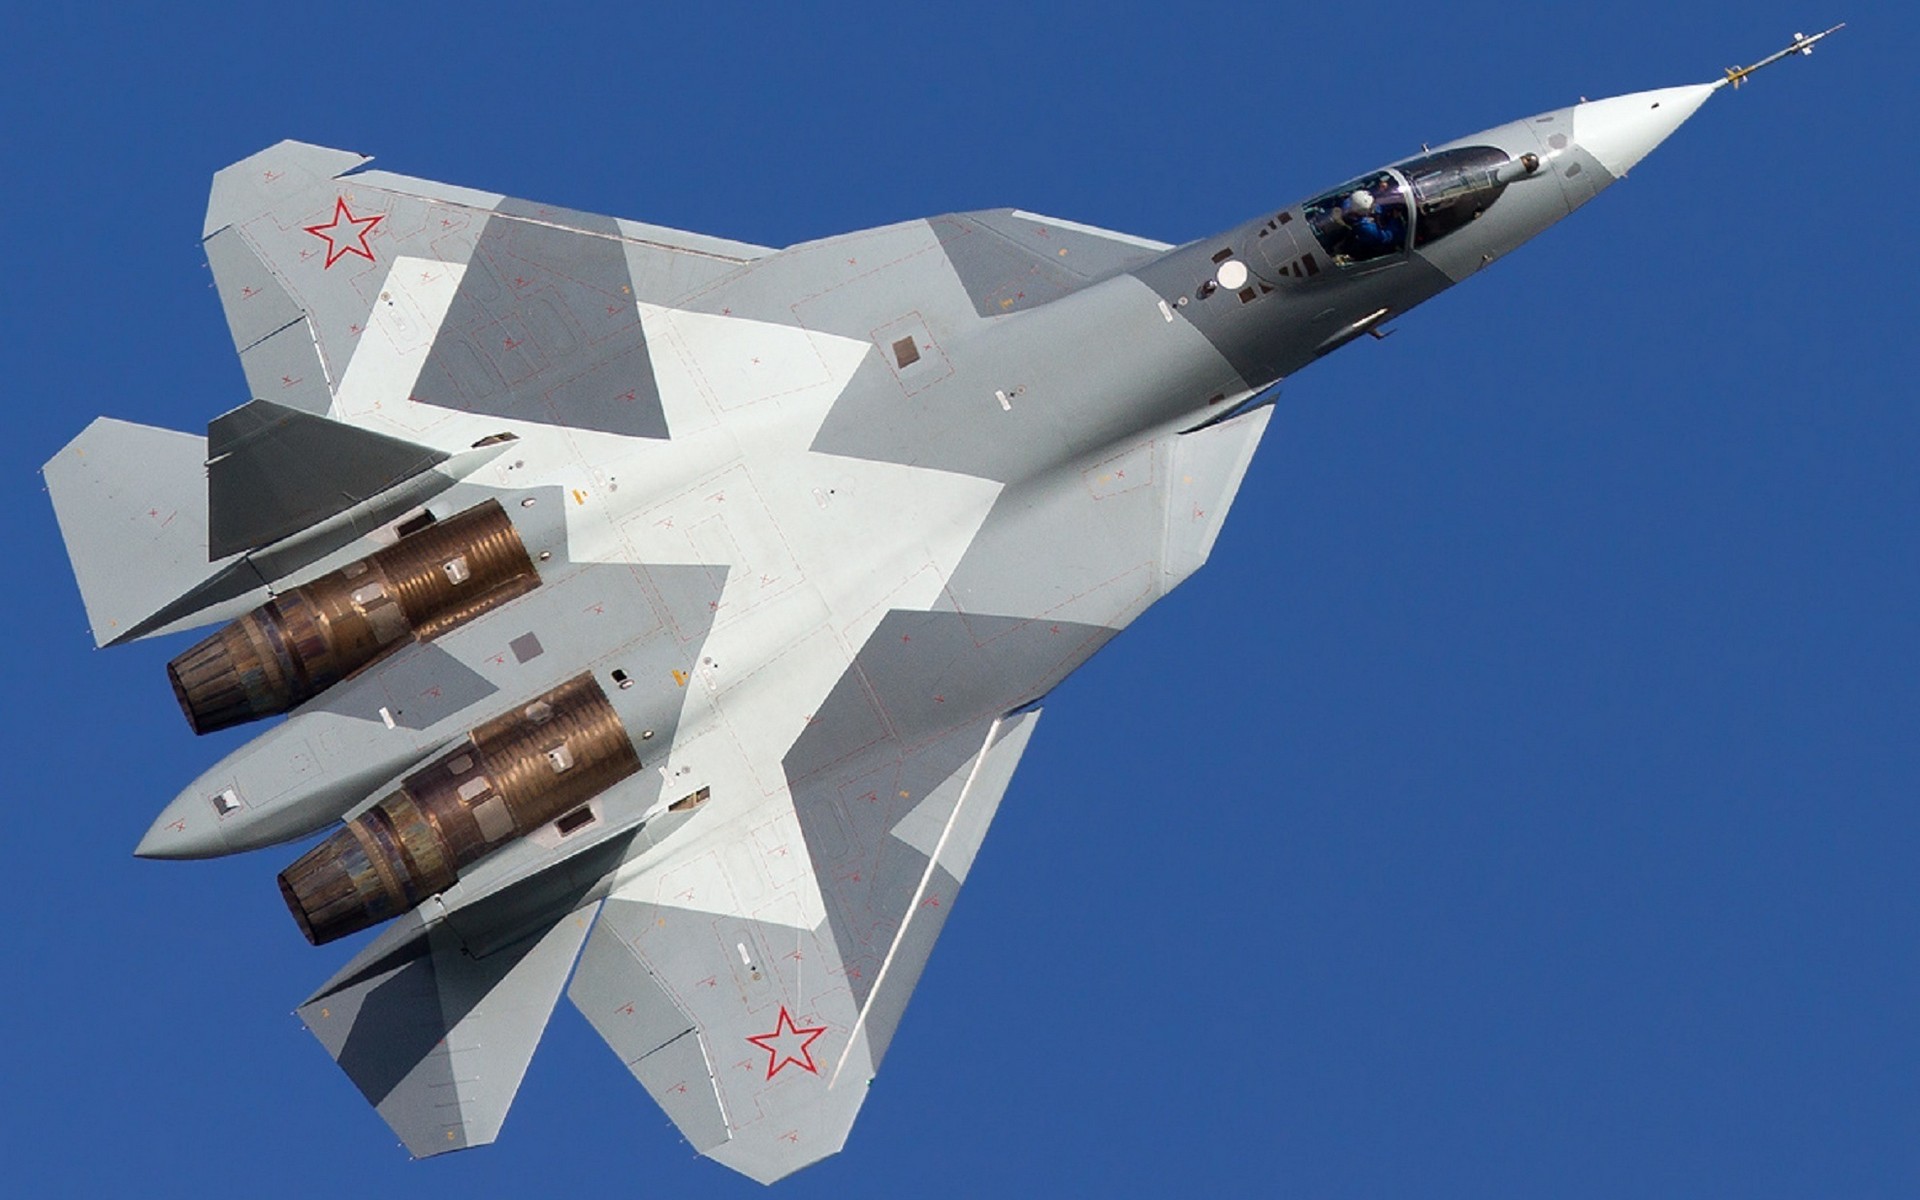 General 1920x1200 aircraft military airplane Sukhoi Su-57 jet fighter Russian Air Force Russian/Soviet aircraft Sukhoi